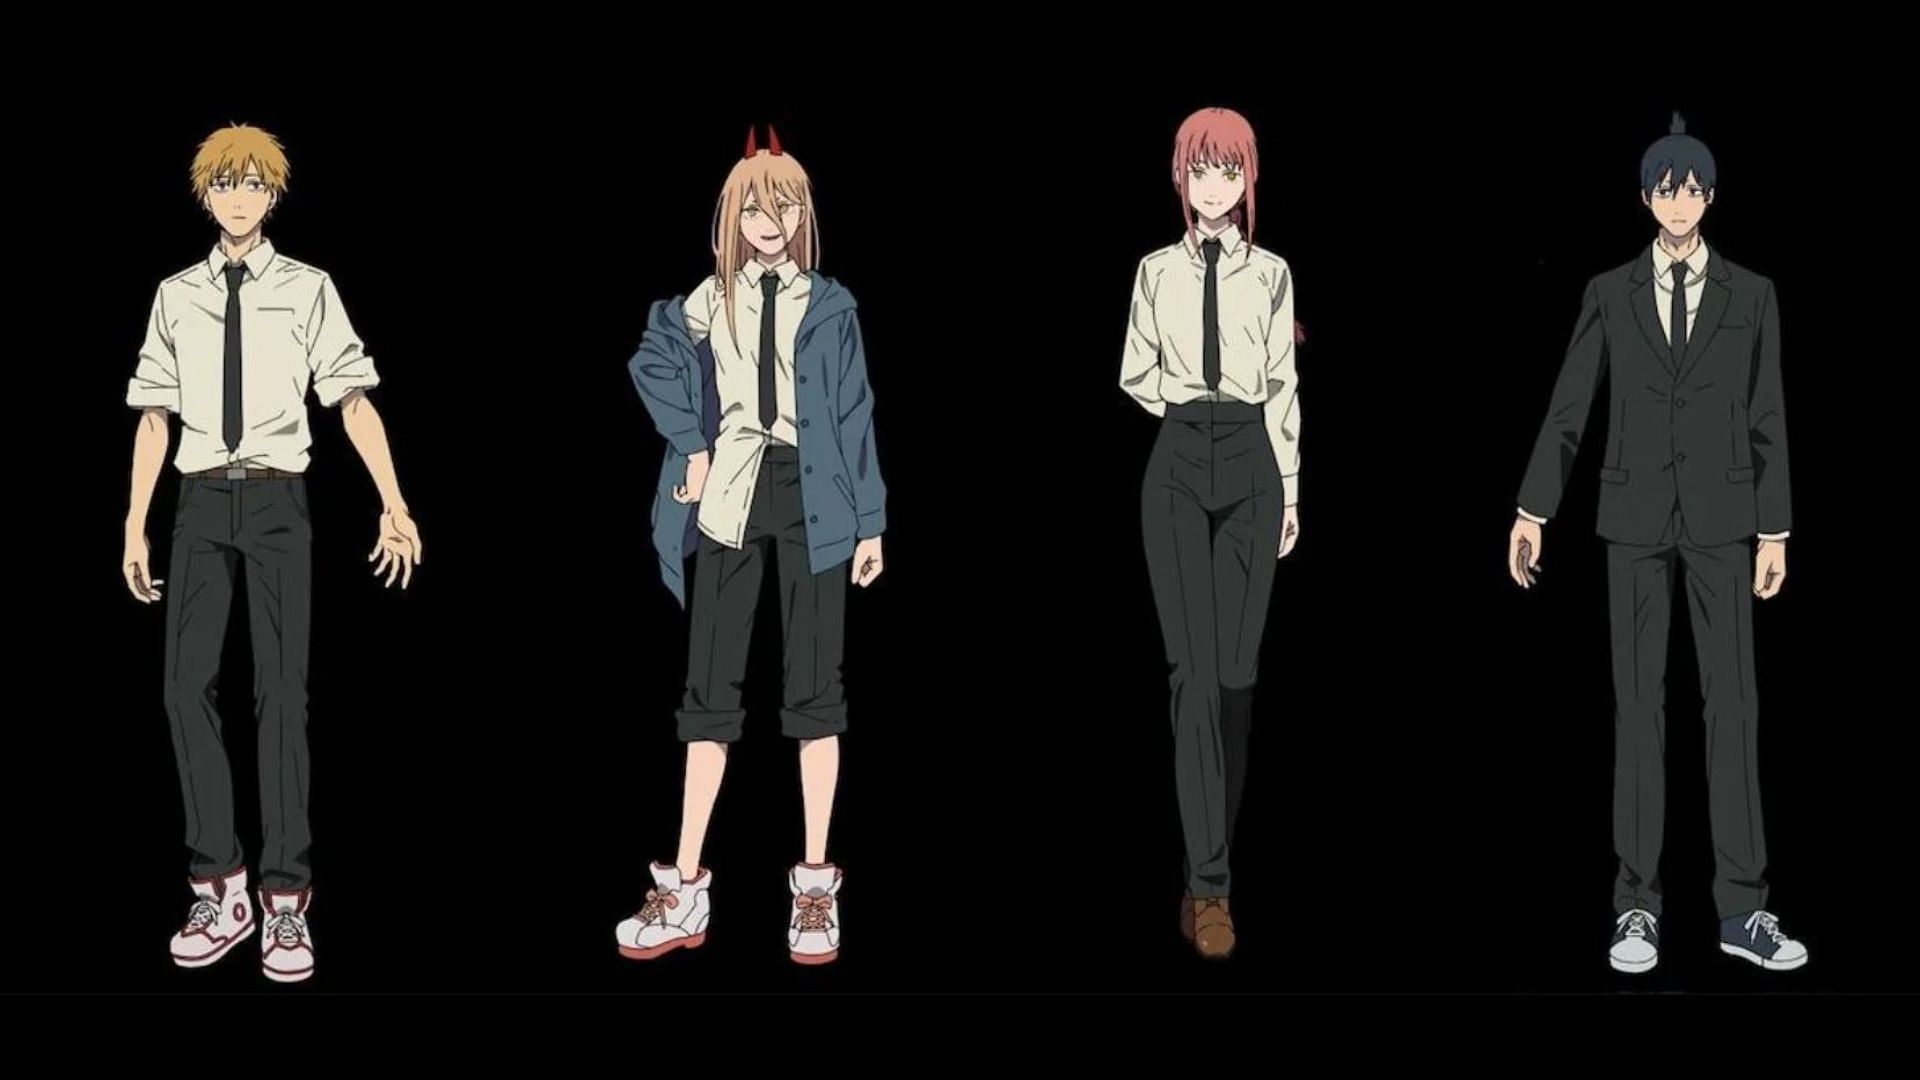 Chainsaw Man Producer Details How Voice Cast Was Picked